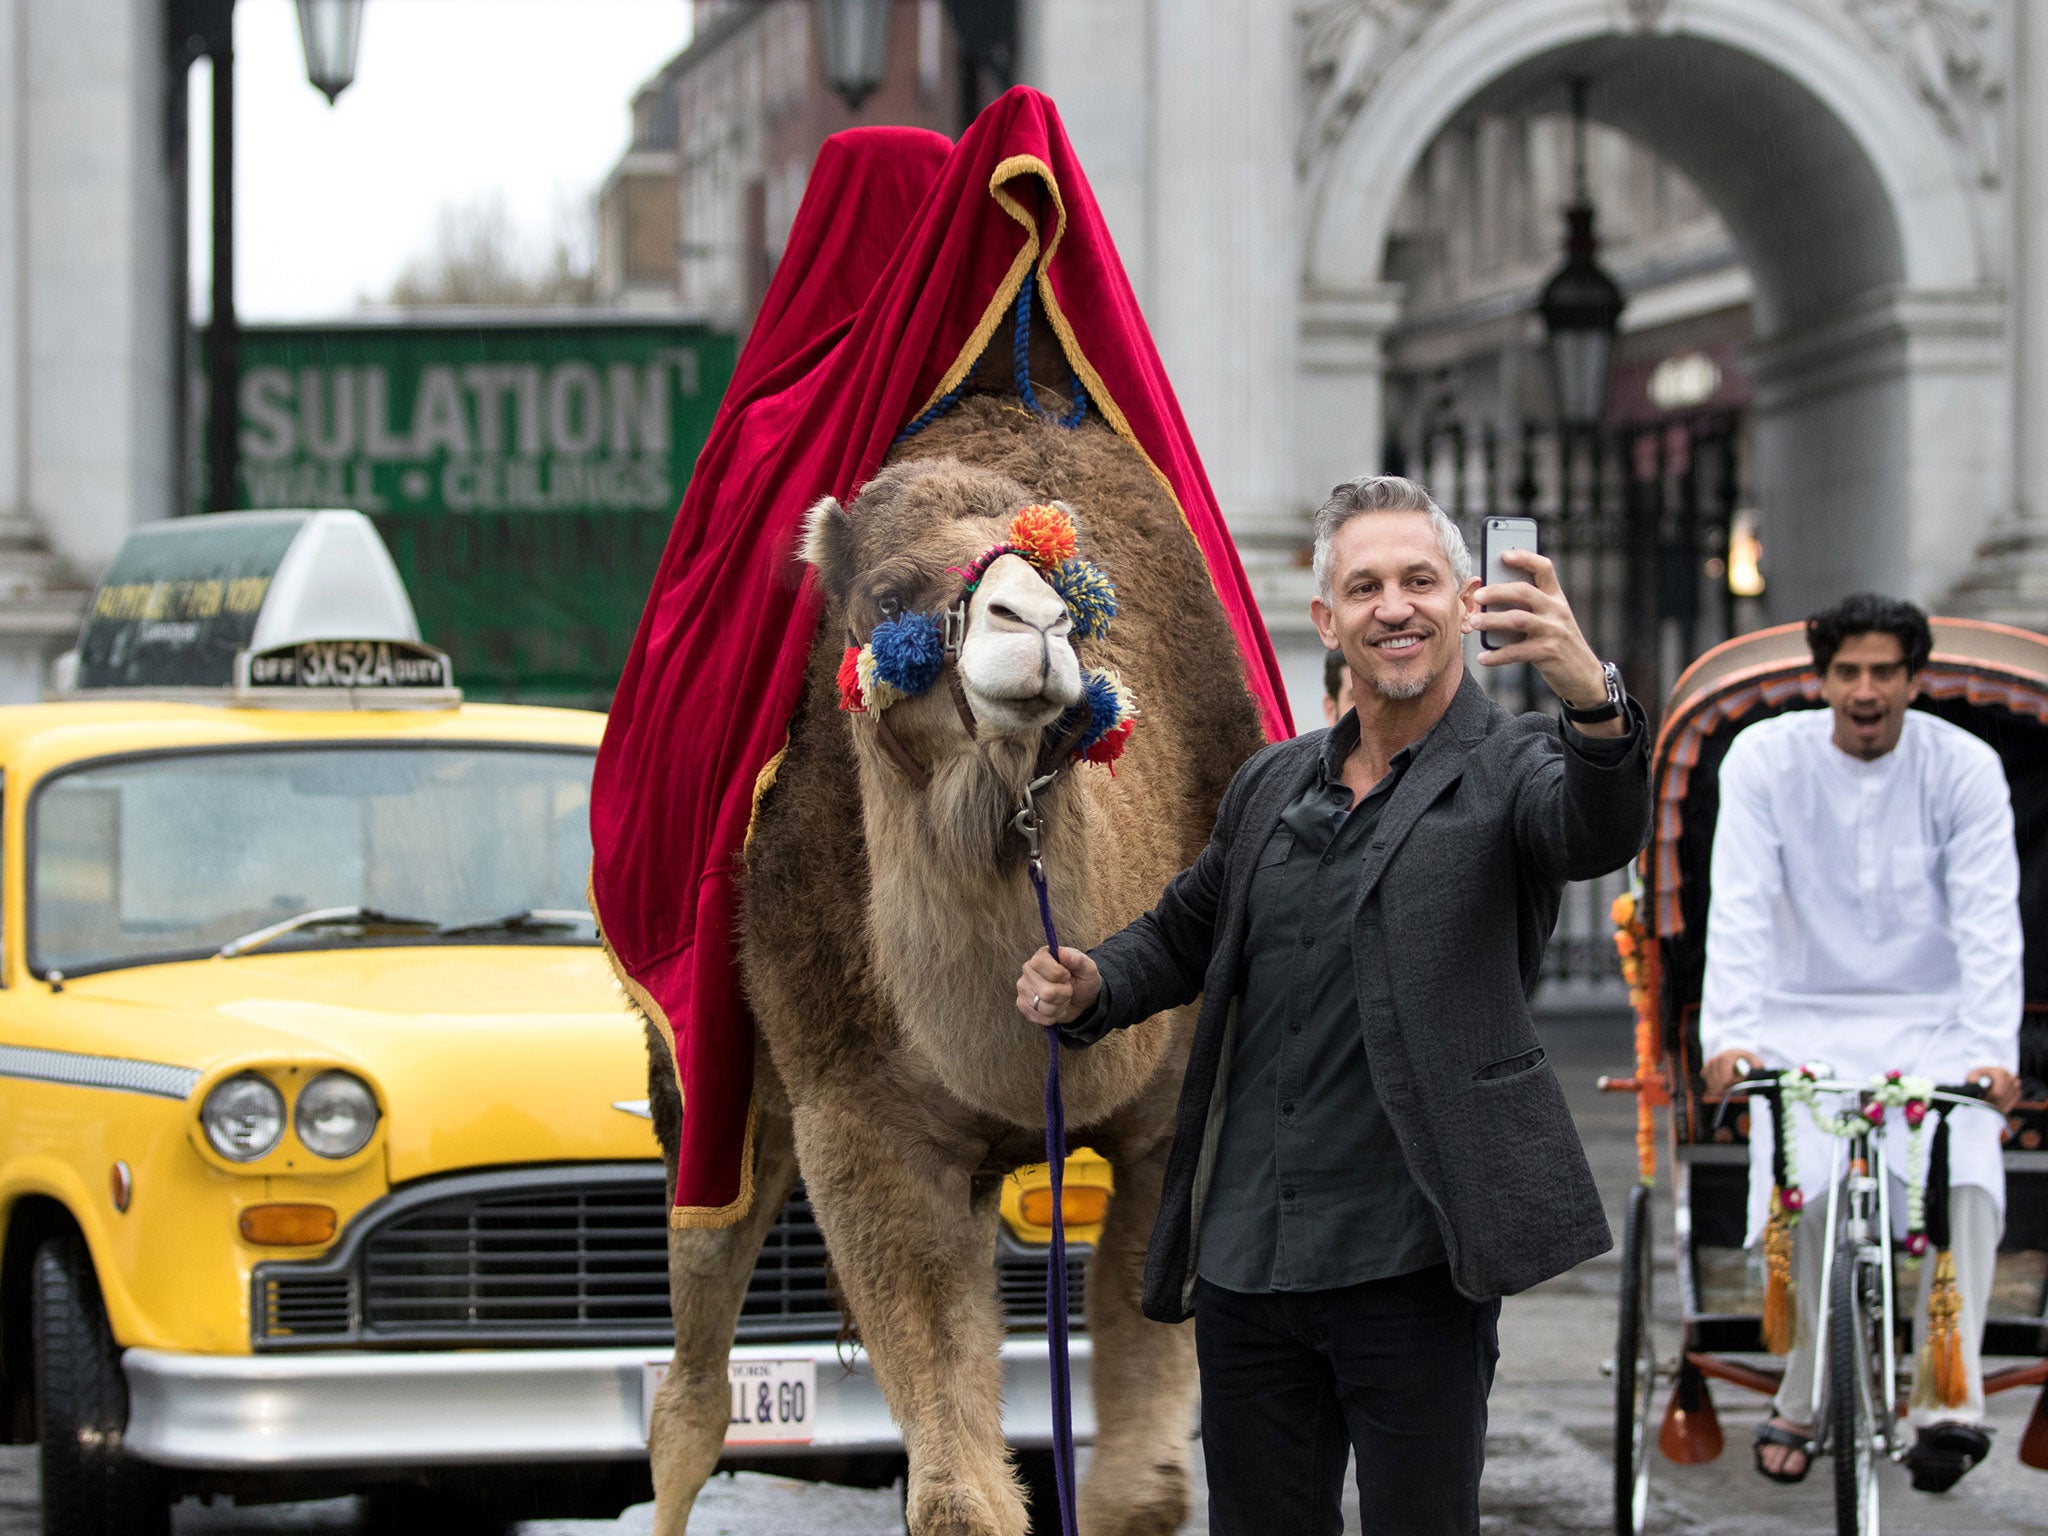 Gary Lineker in central London filming for a Walkers advert with that camel